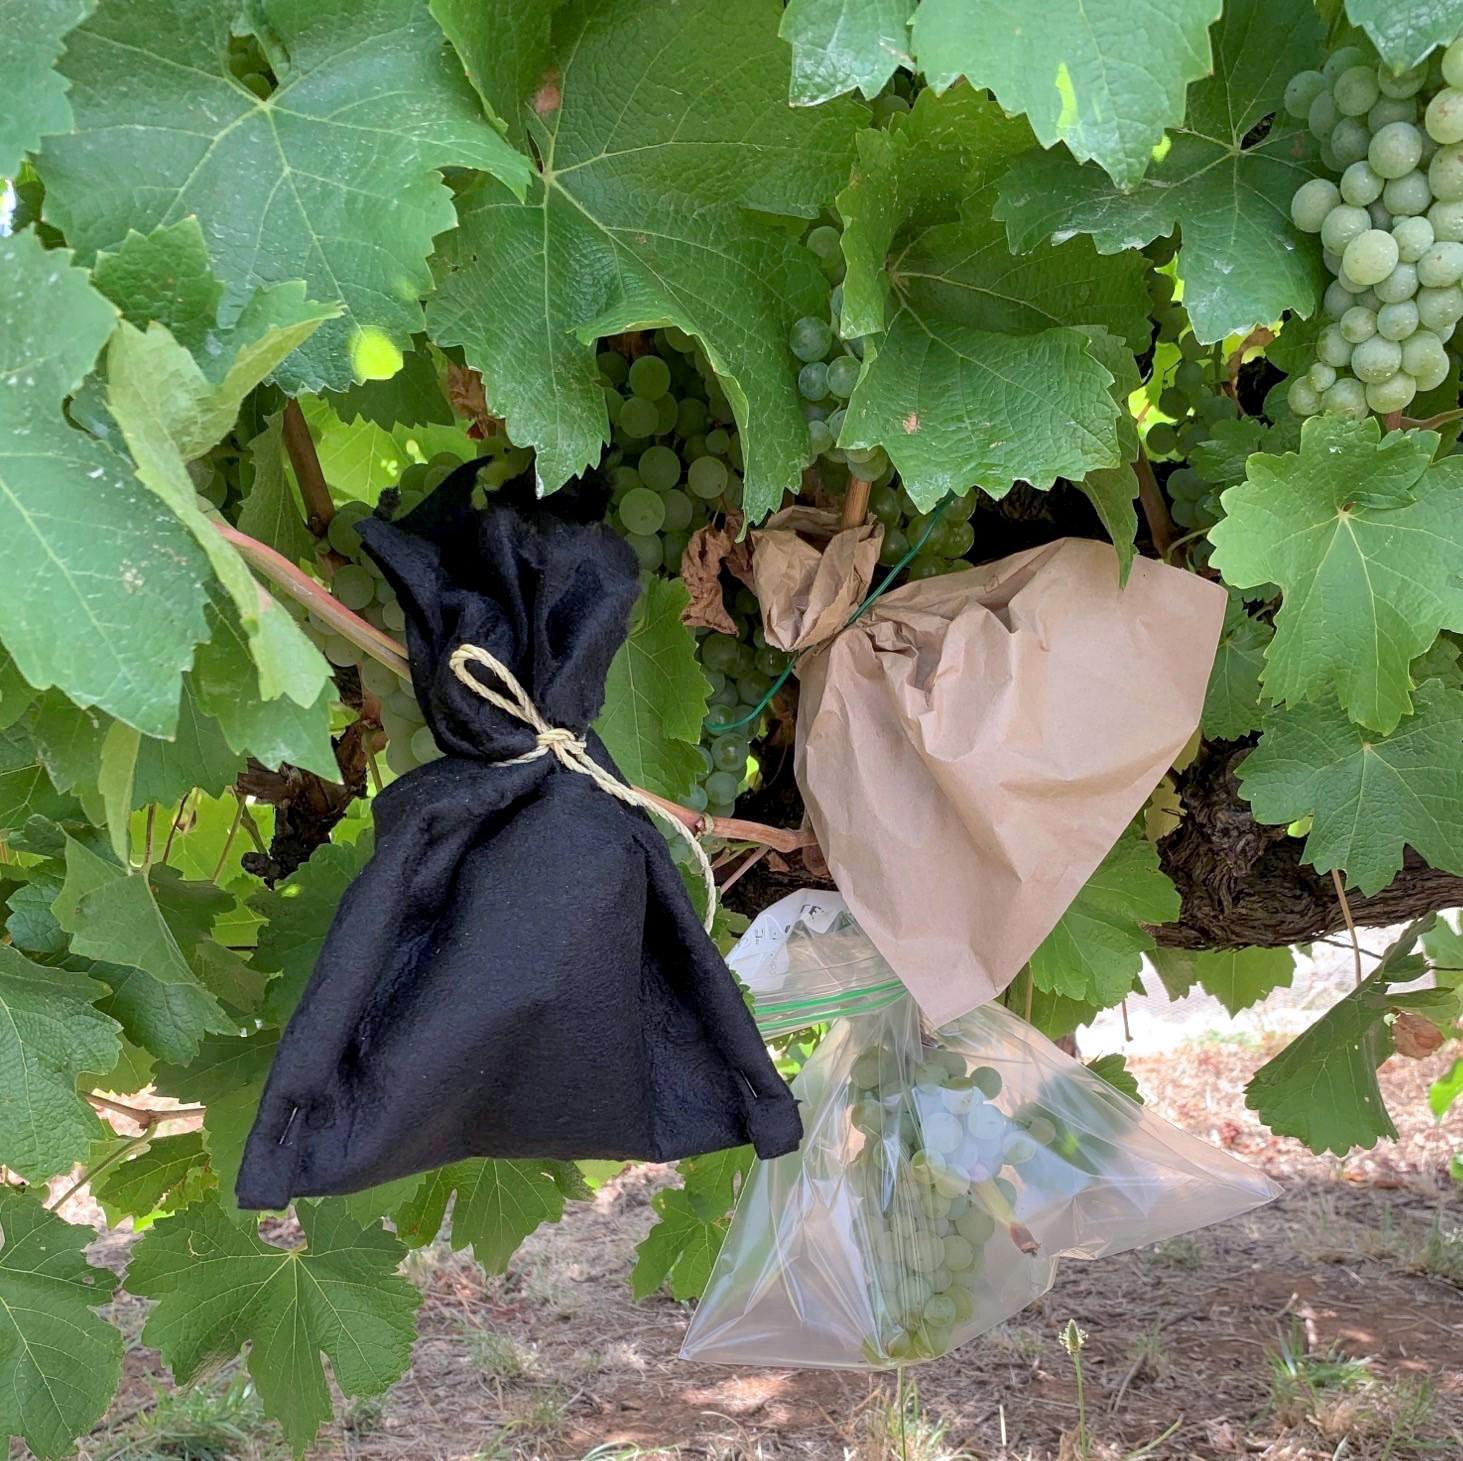 Trial of activated carbon hood technology to prevent smoke taint in grapes.